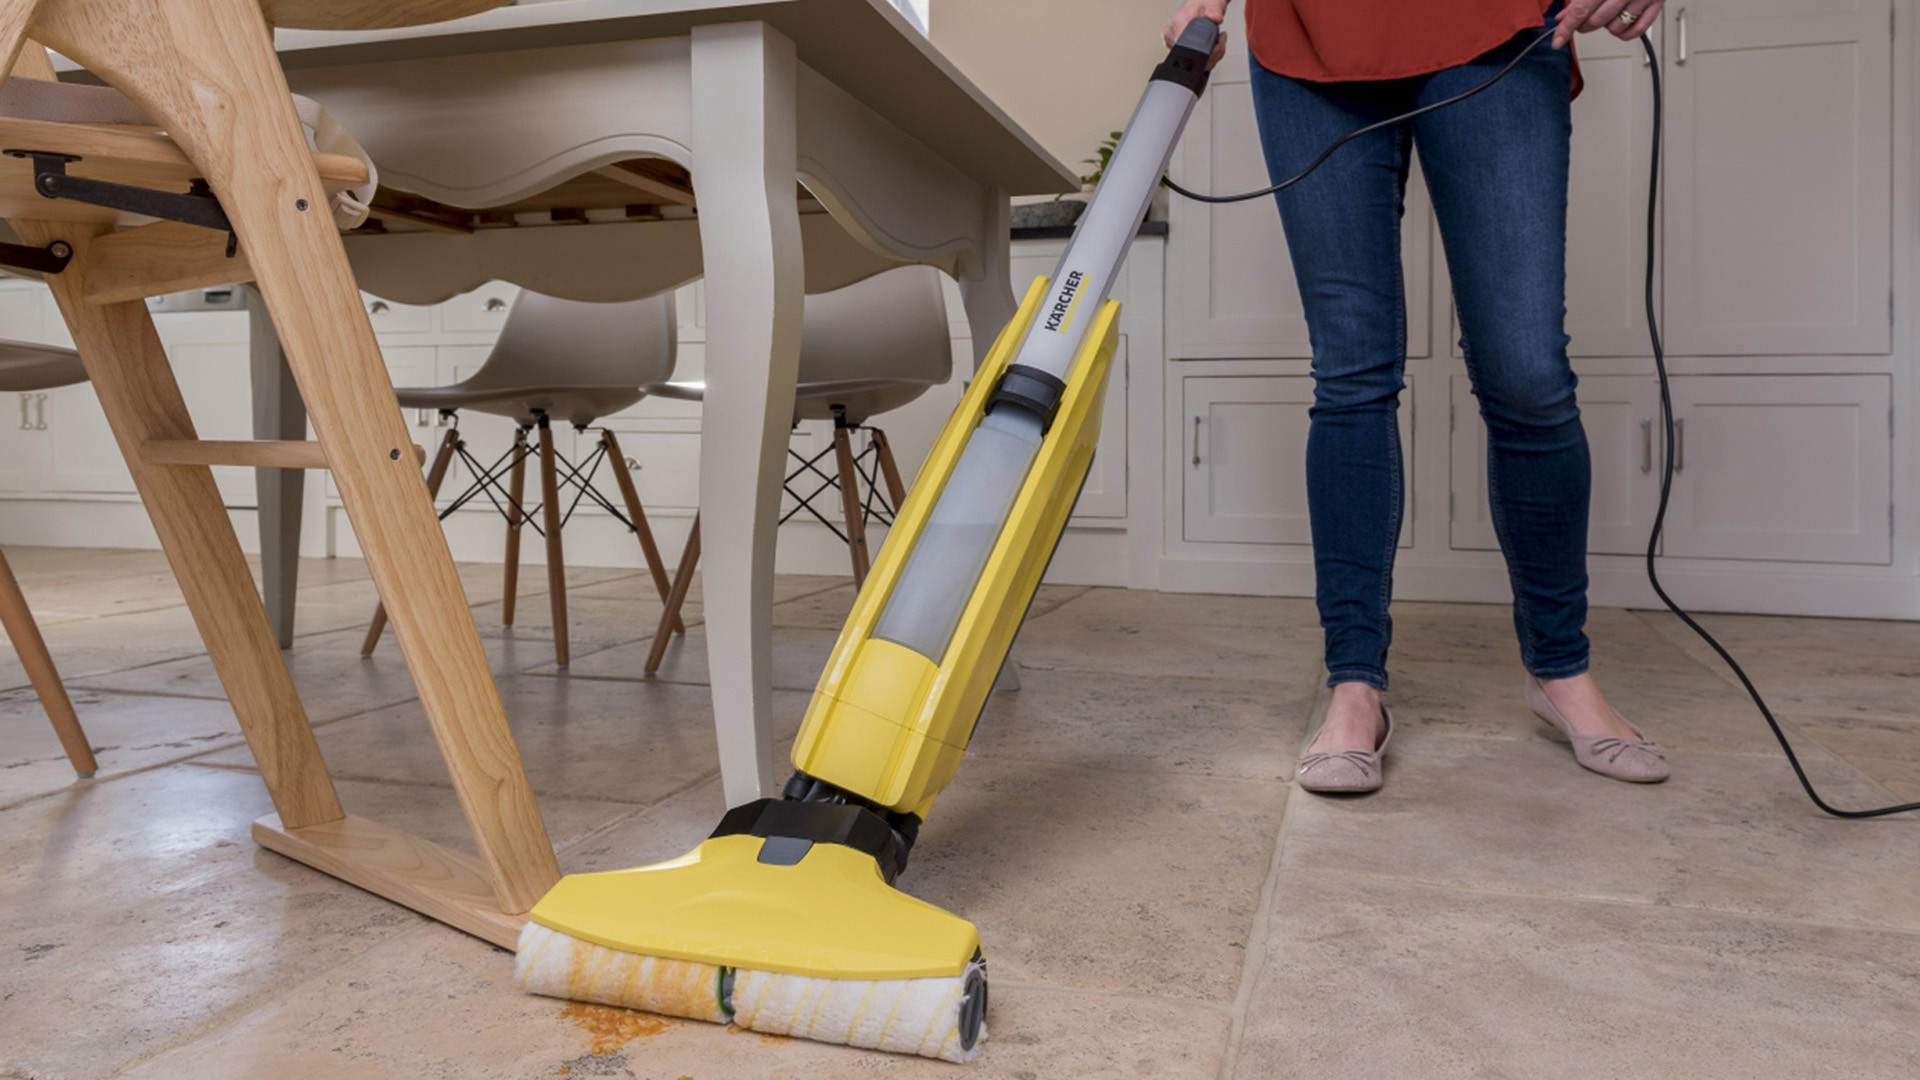 15 Lovable Best Vacuum for Pet Hair and Hardwood Floors and Carpet 2022 free download best vacuum for pet hair and hardwood floors and carpet of karcher fc5 hard floor cleaner review trusted reviews for karcher fc5 5 1